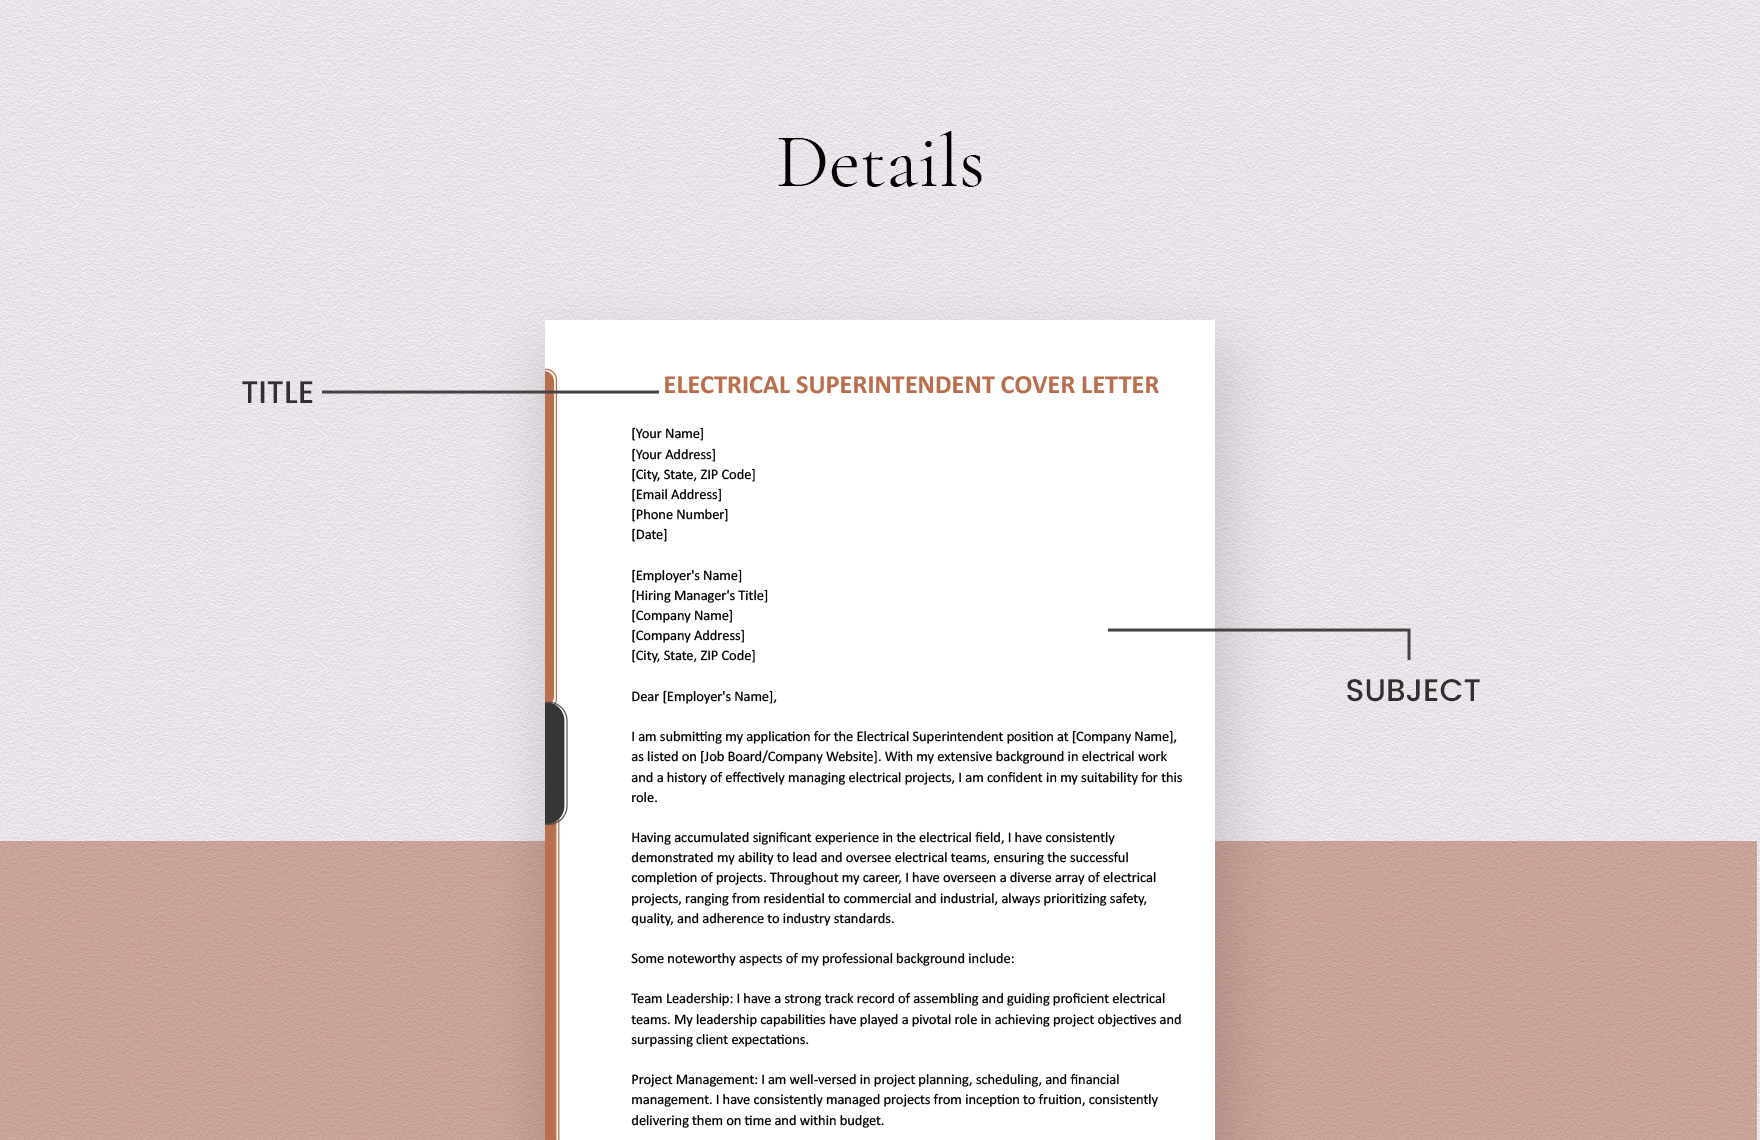 Electrical Superintendent Cover Letter